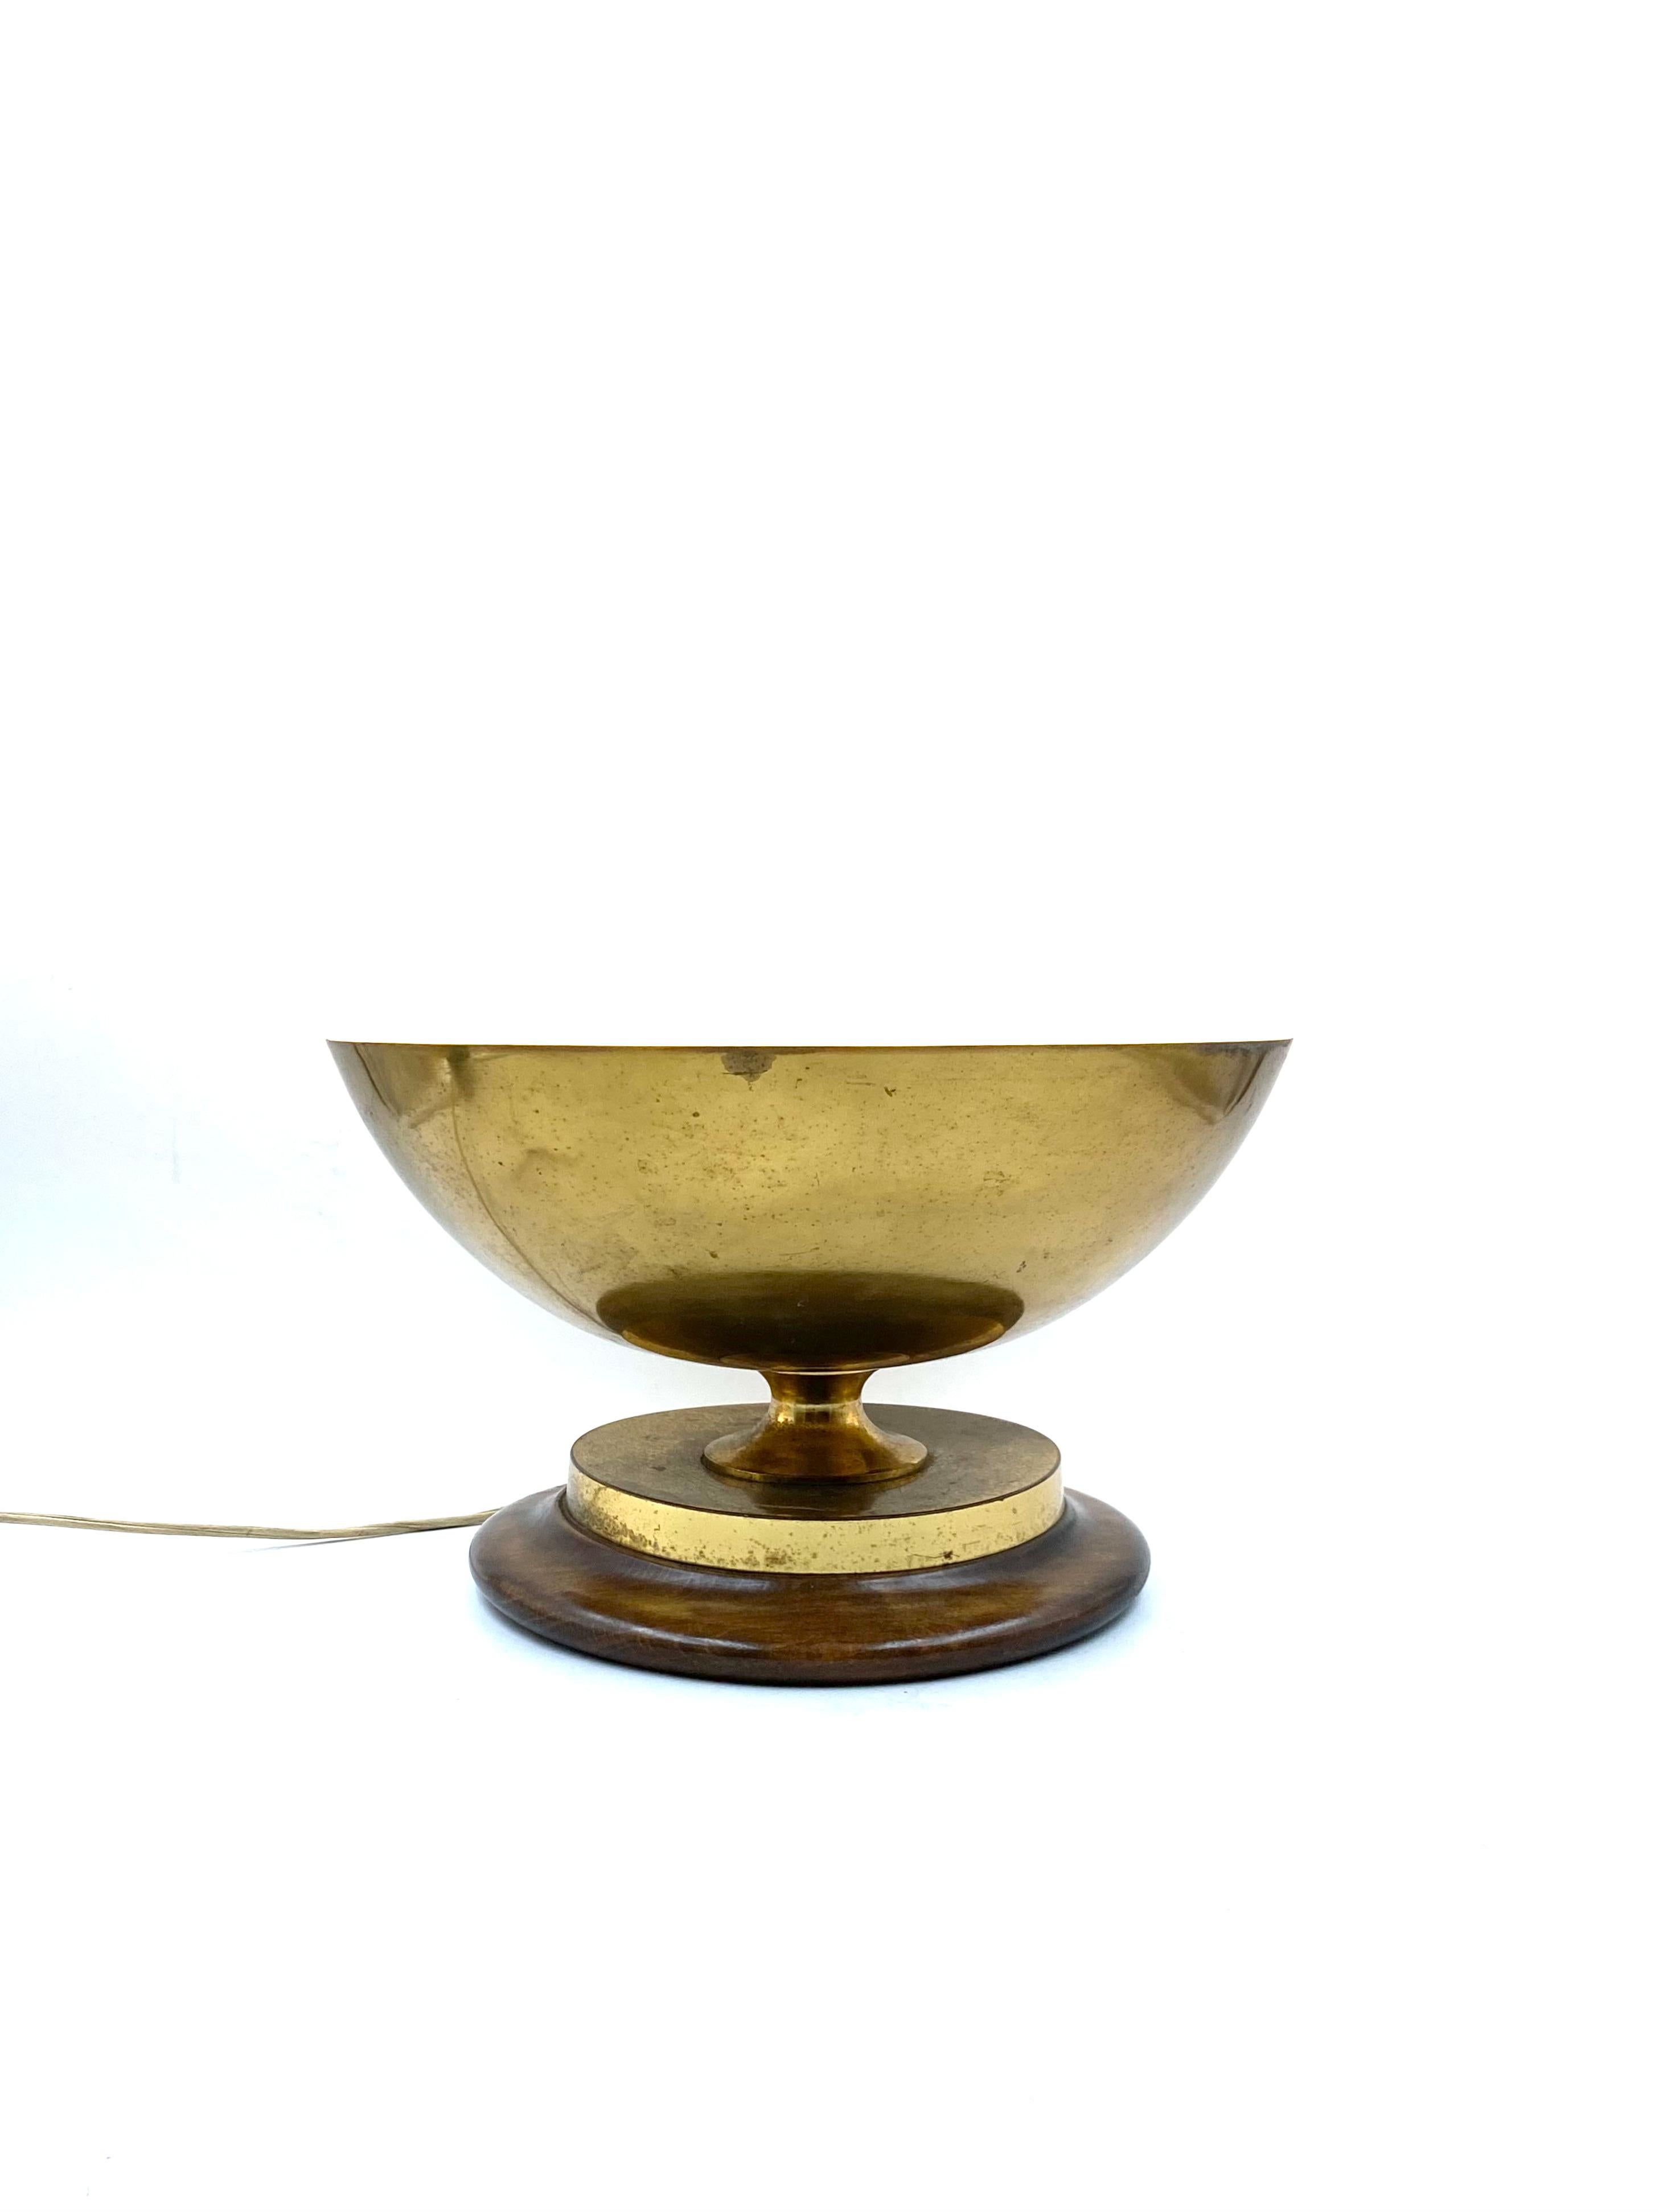 Important Midcentury Spherical Murano Glass Table Lamp, Mazzega, Italy, 1960s For Sale 4